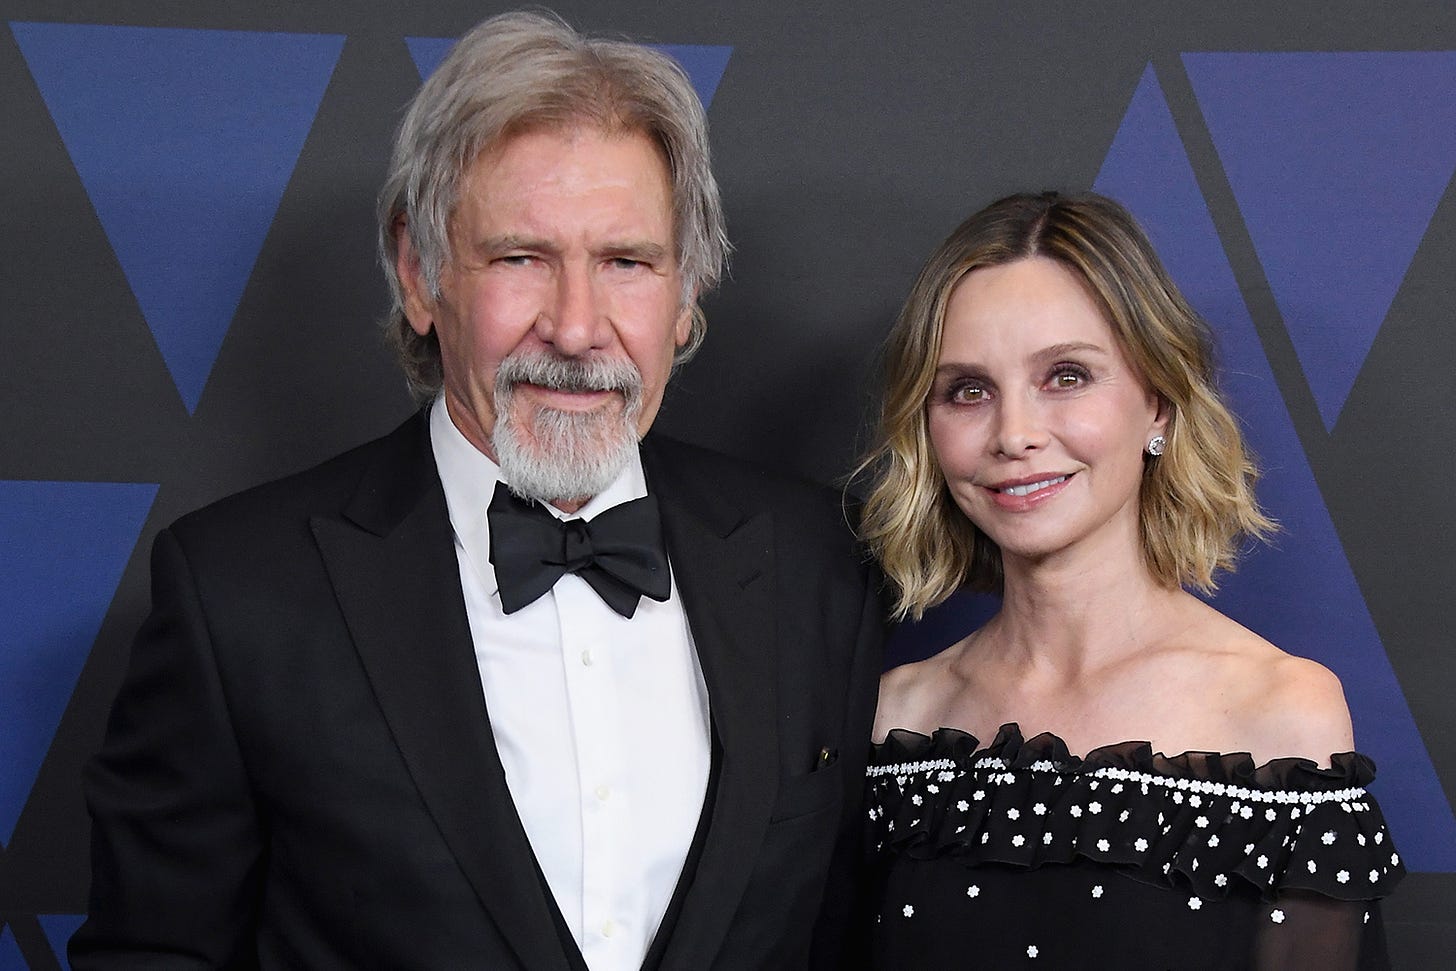 Harrison Ford Opens Up About Marriage to Calista Flockhart | PEOPLE.com